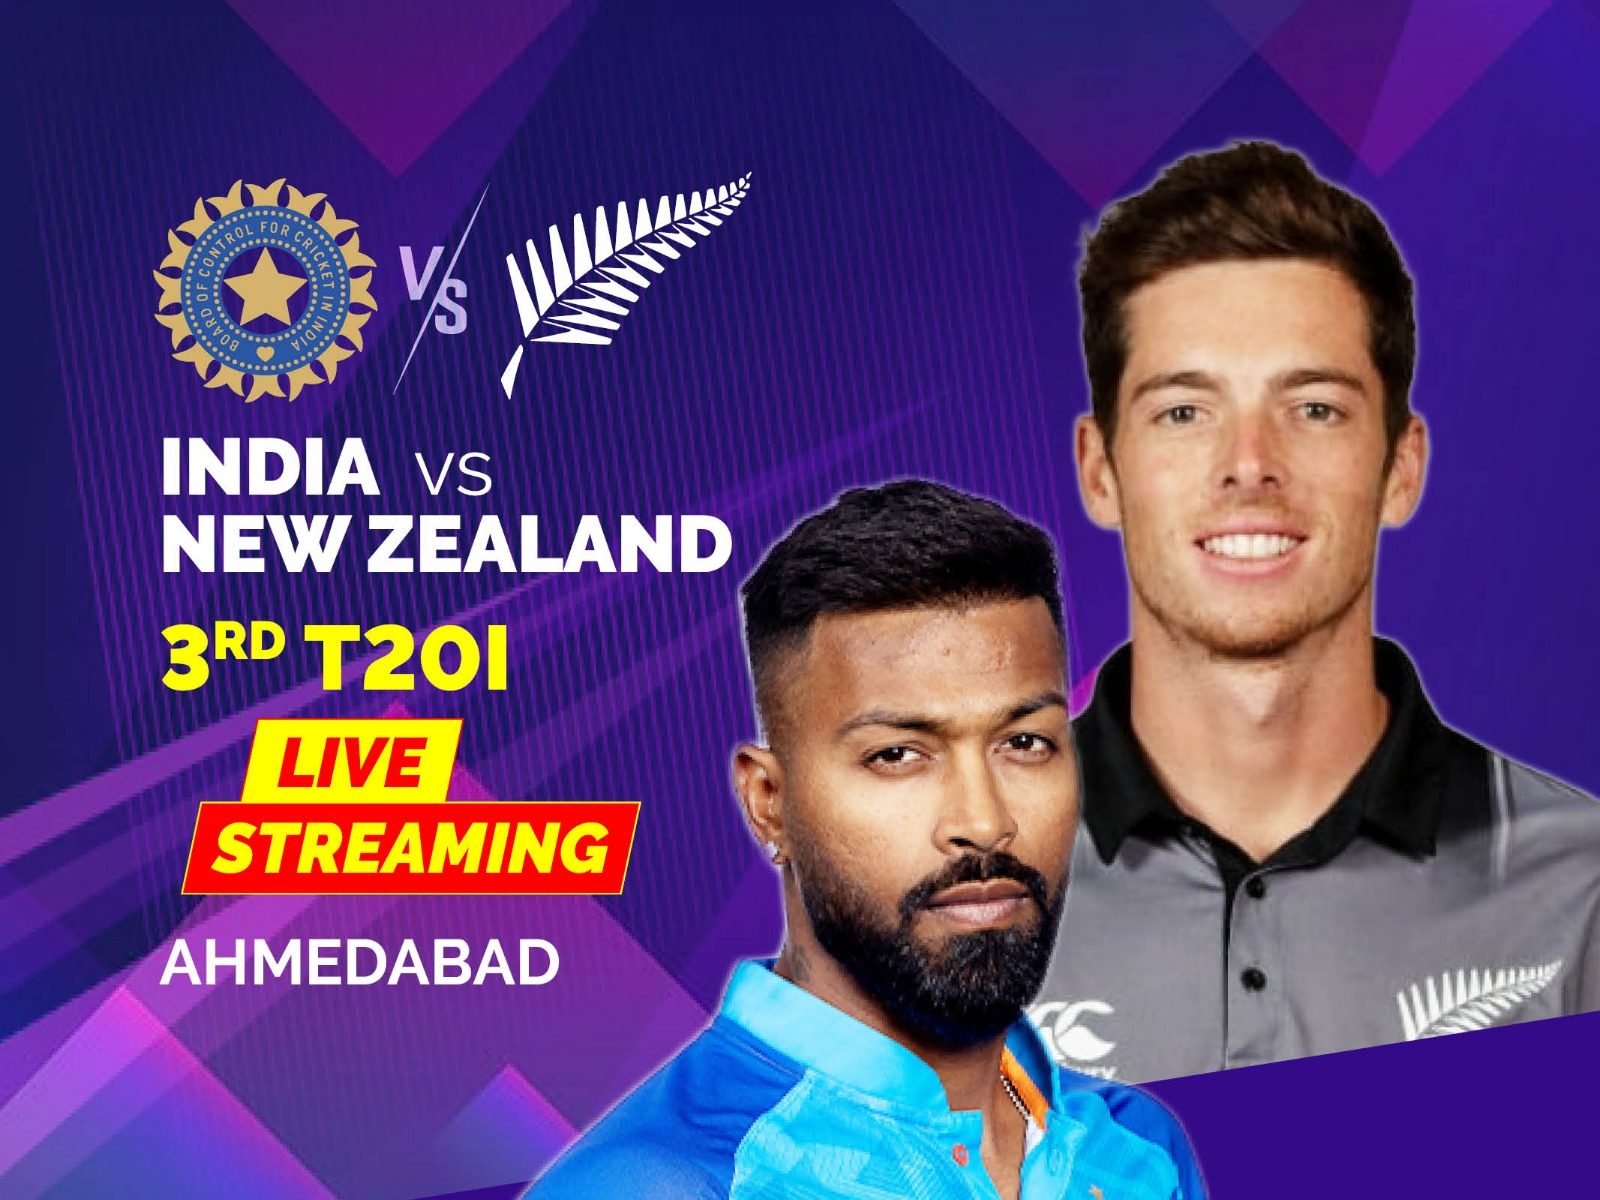 India vs New Zealand Live Streaming Cricket When and Where to Watch IND vs NZ Third T20I Live Coverage on Live TV Online